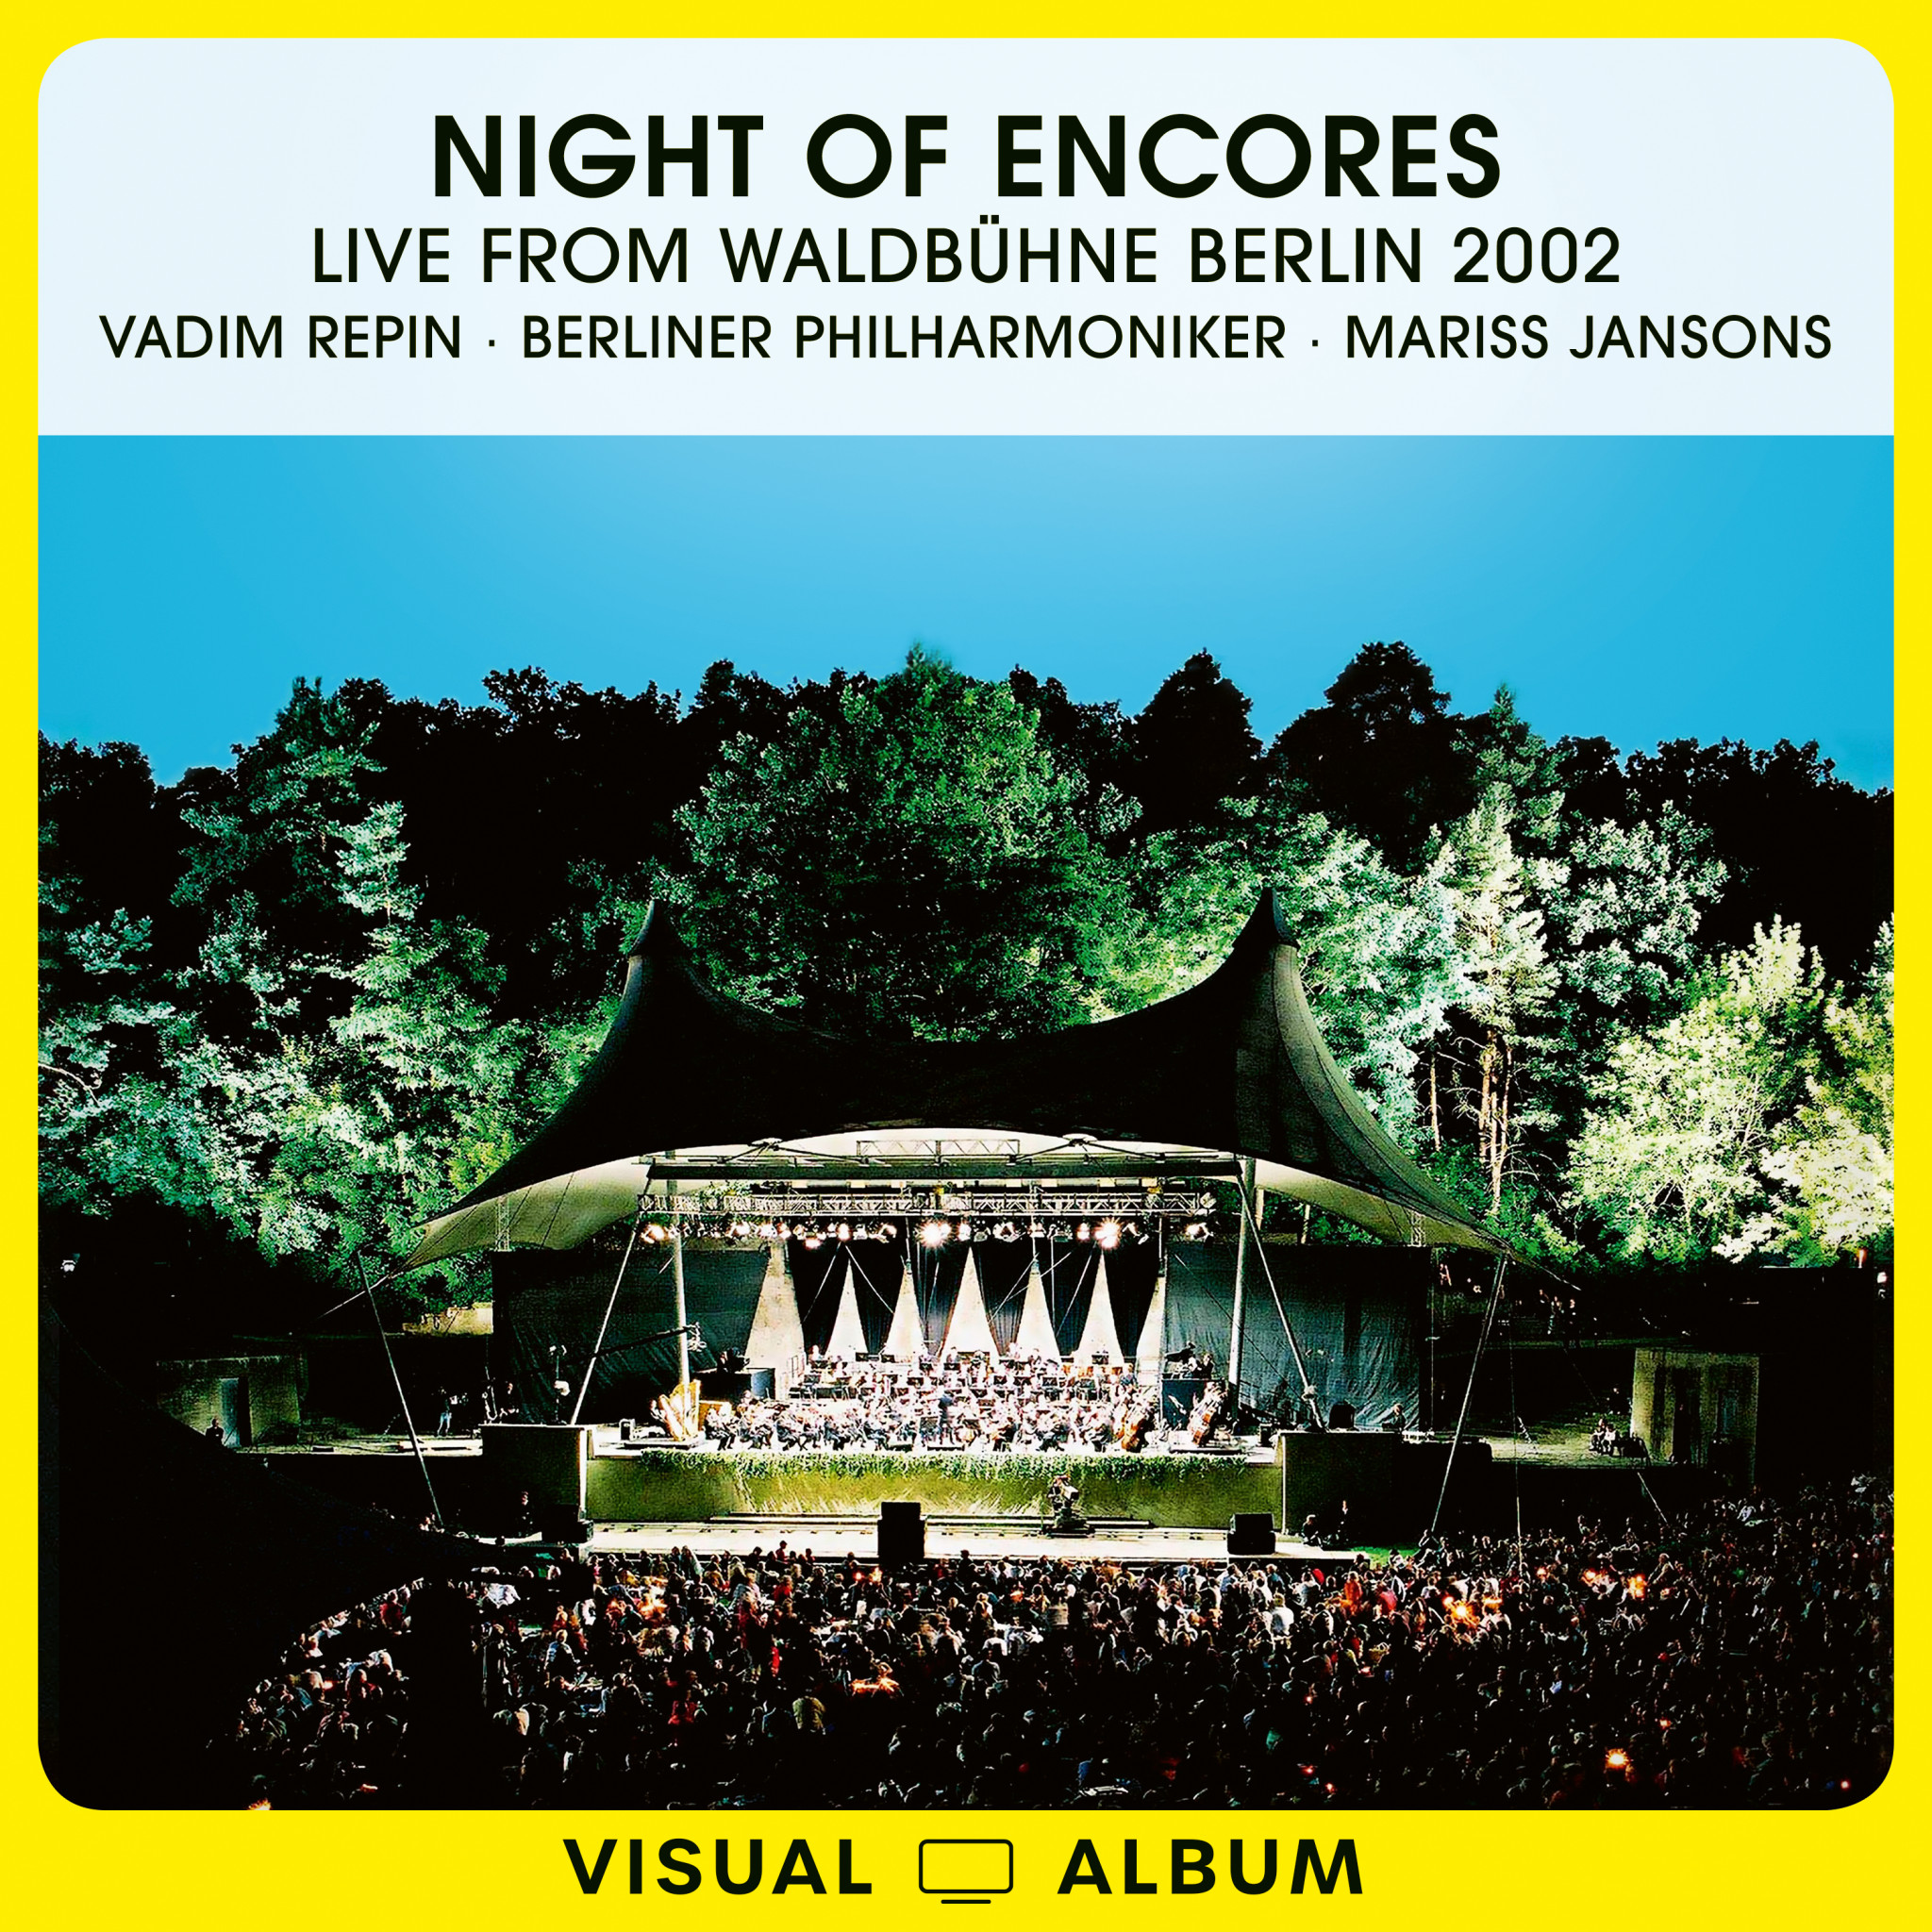 Night Of Encores Live from Waldbühne Berlin 2002 EV new cover